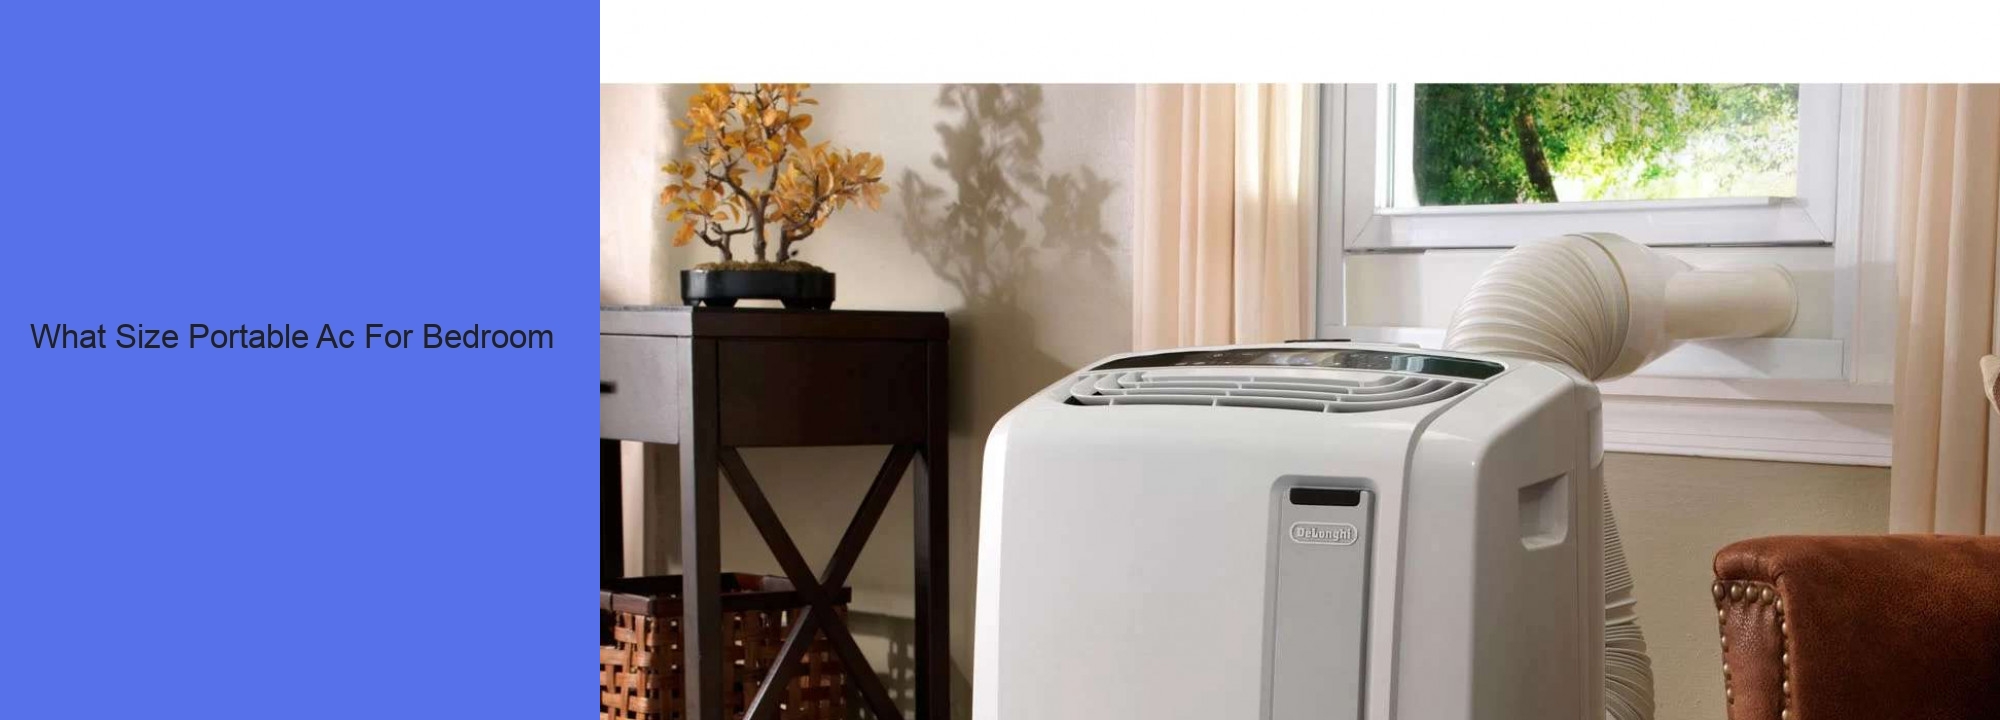 What Size Portable Ac For Bedroom